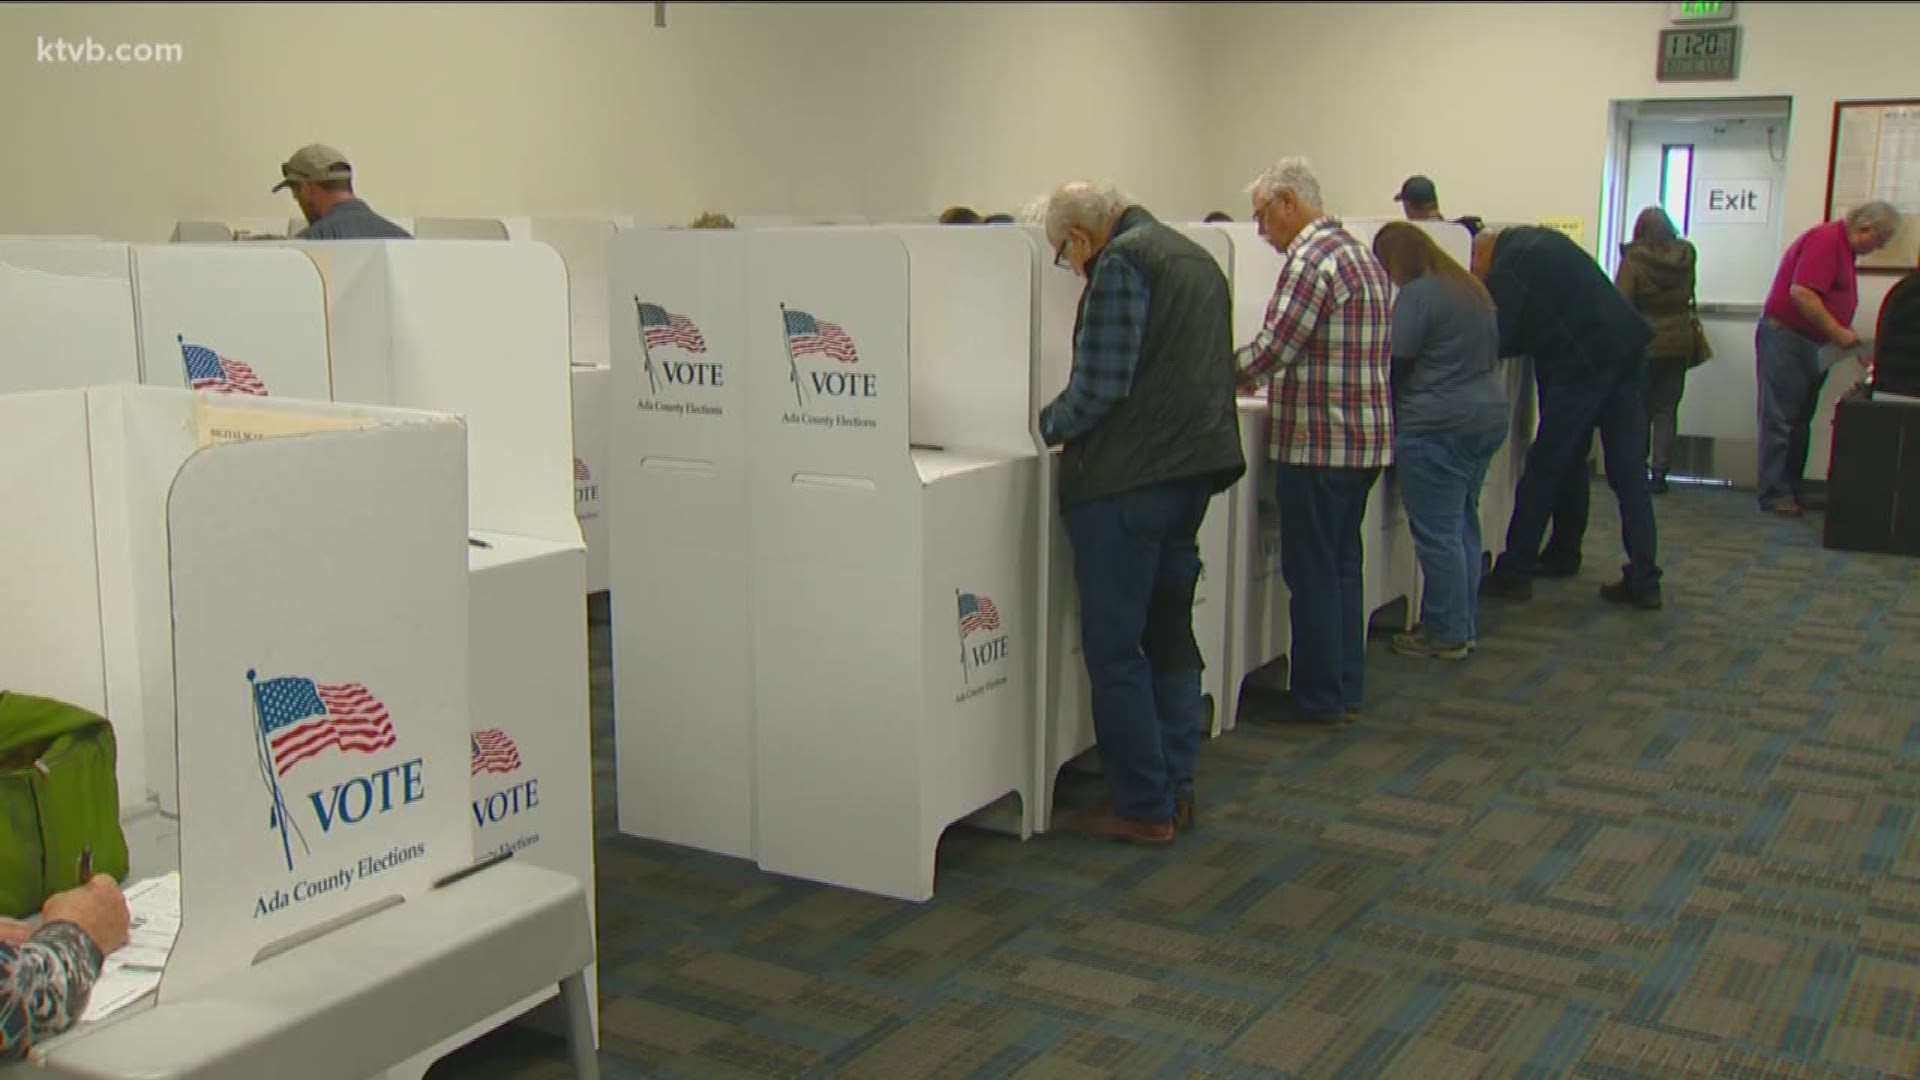 In Ada County, people are showing up in big numbers for early voting and returning a high number of absentee ballots this year. Elections officials expect that to roll into Election Day on November 6.